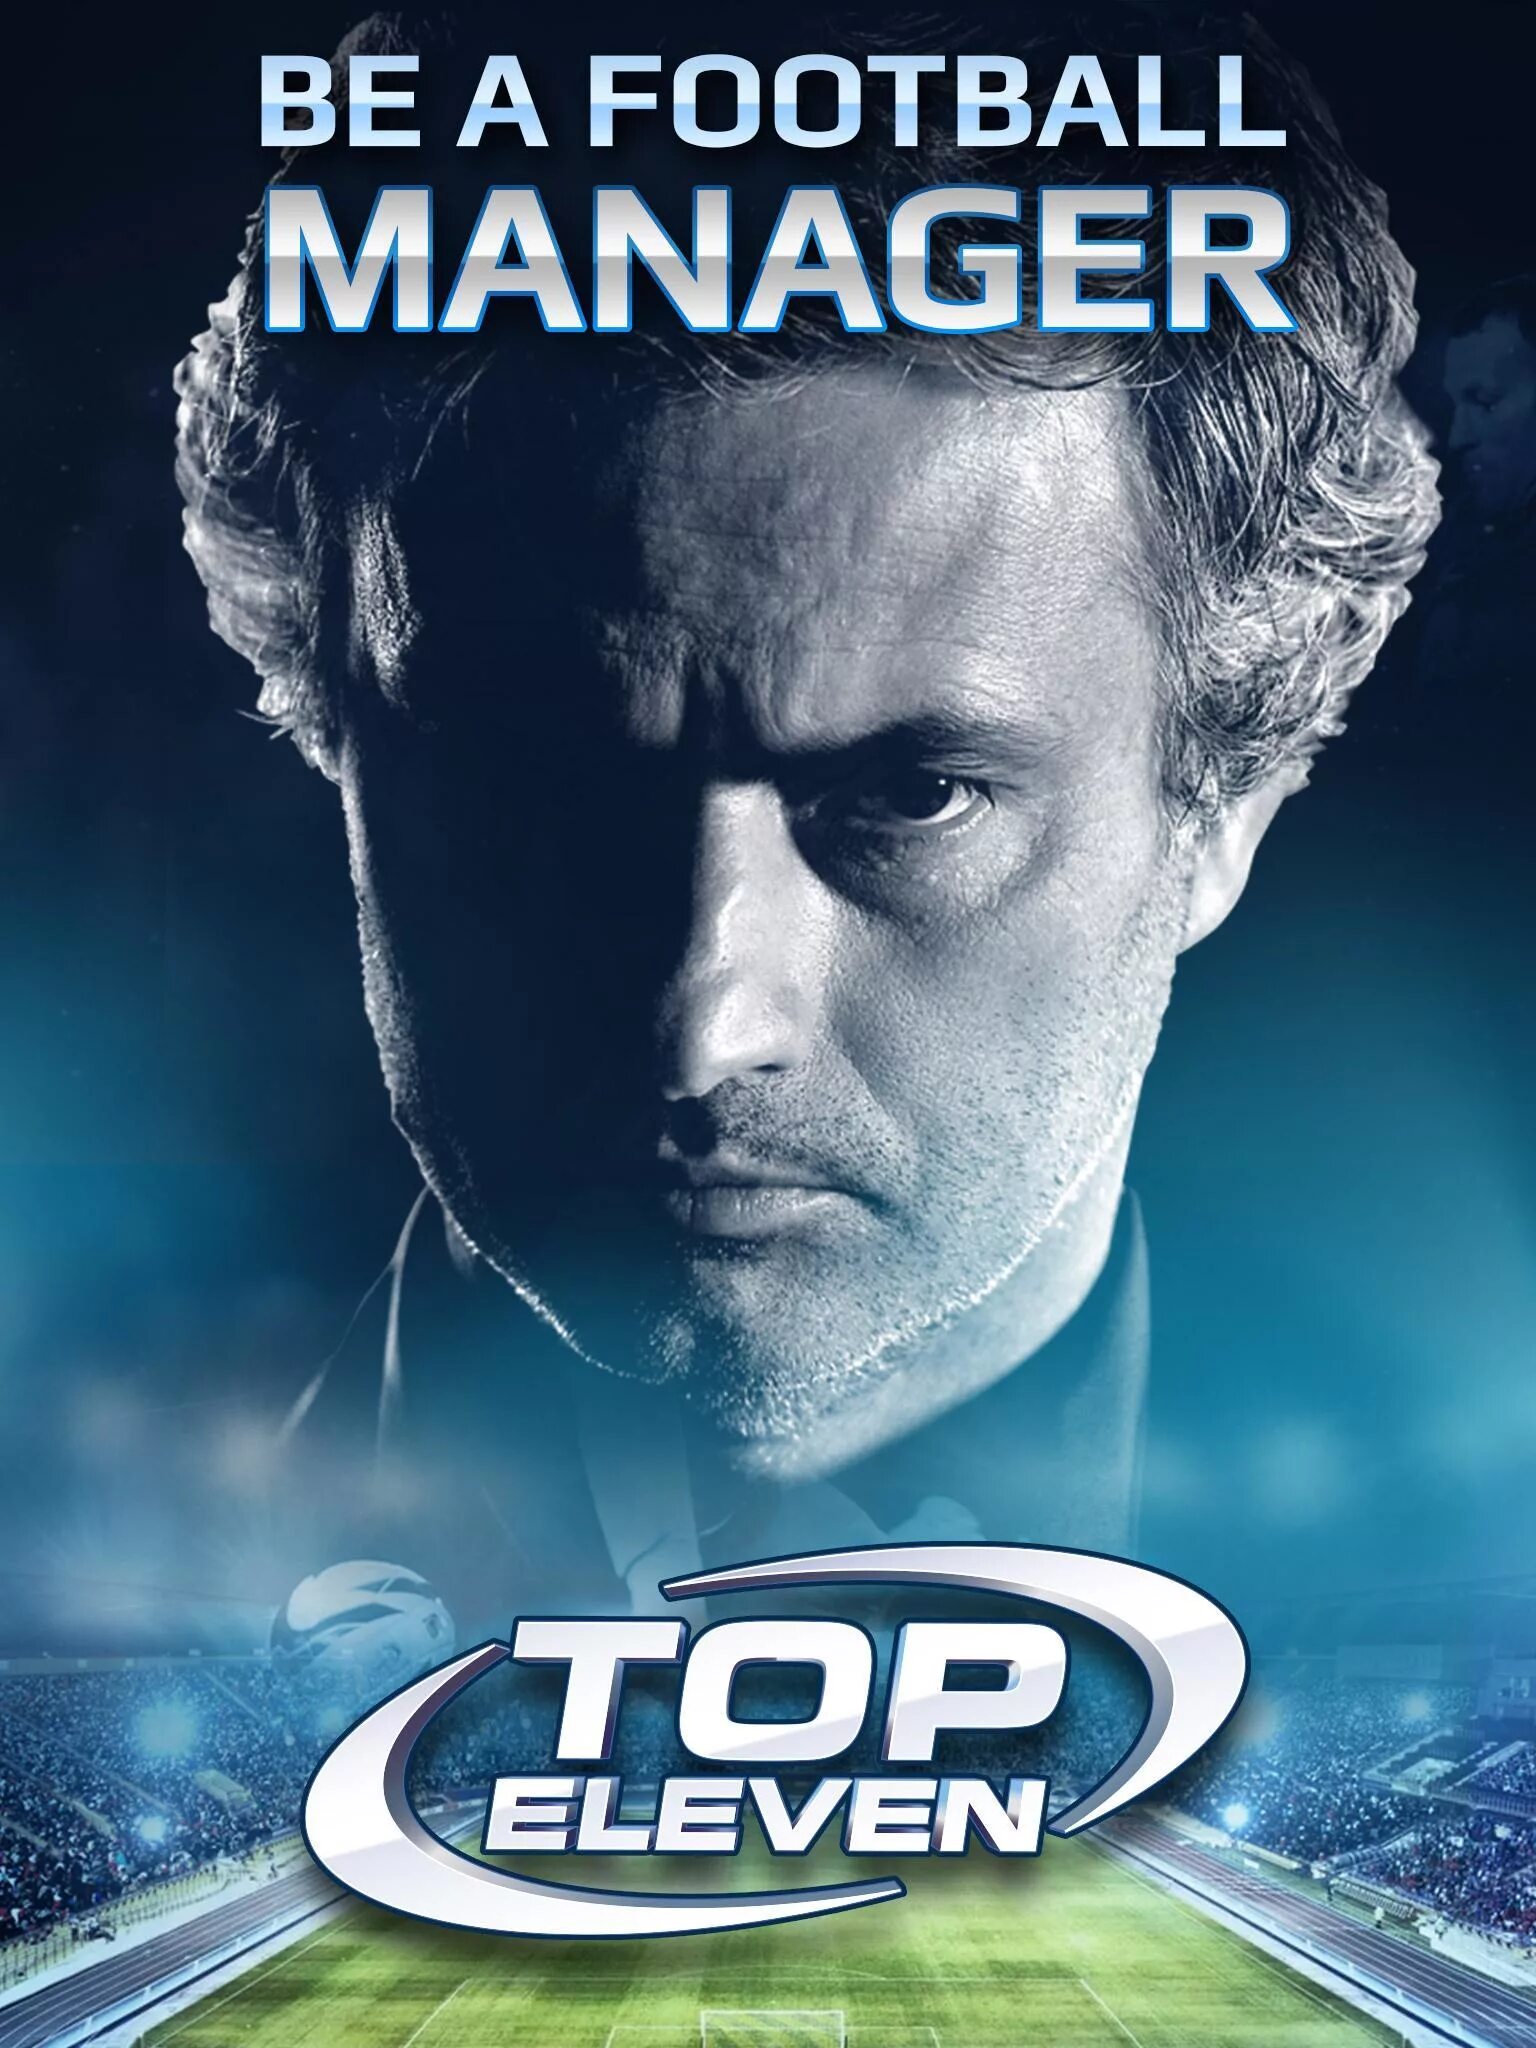 Игру топ 11. Top Eleven. Top Eleven Football Manager. Top Eleven Android. Top Eleven 2012.